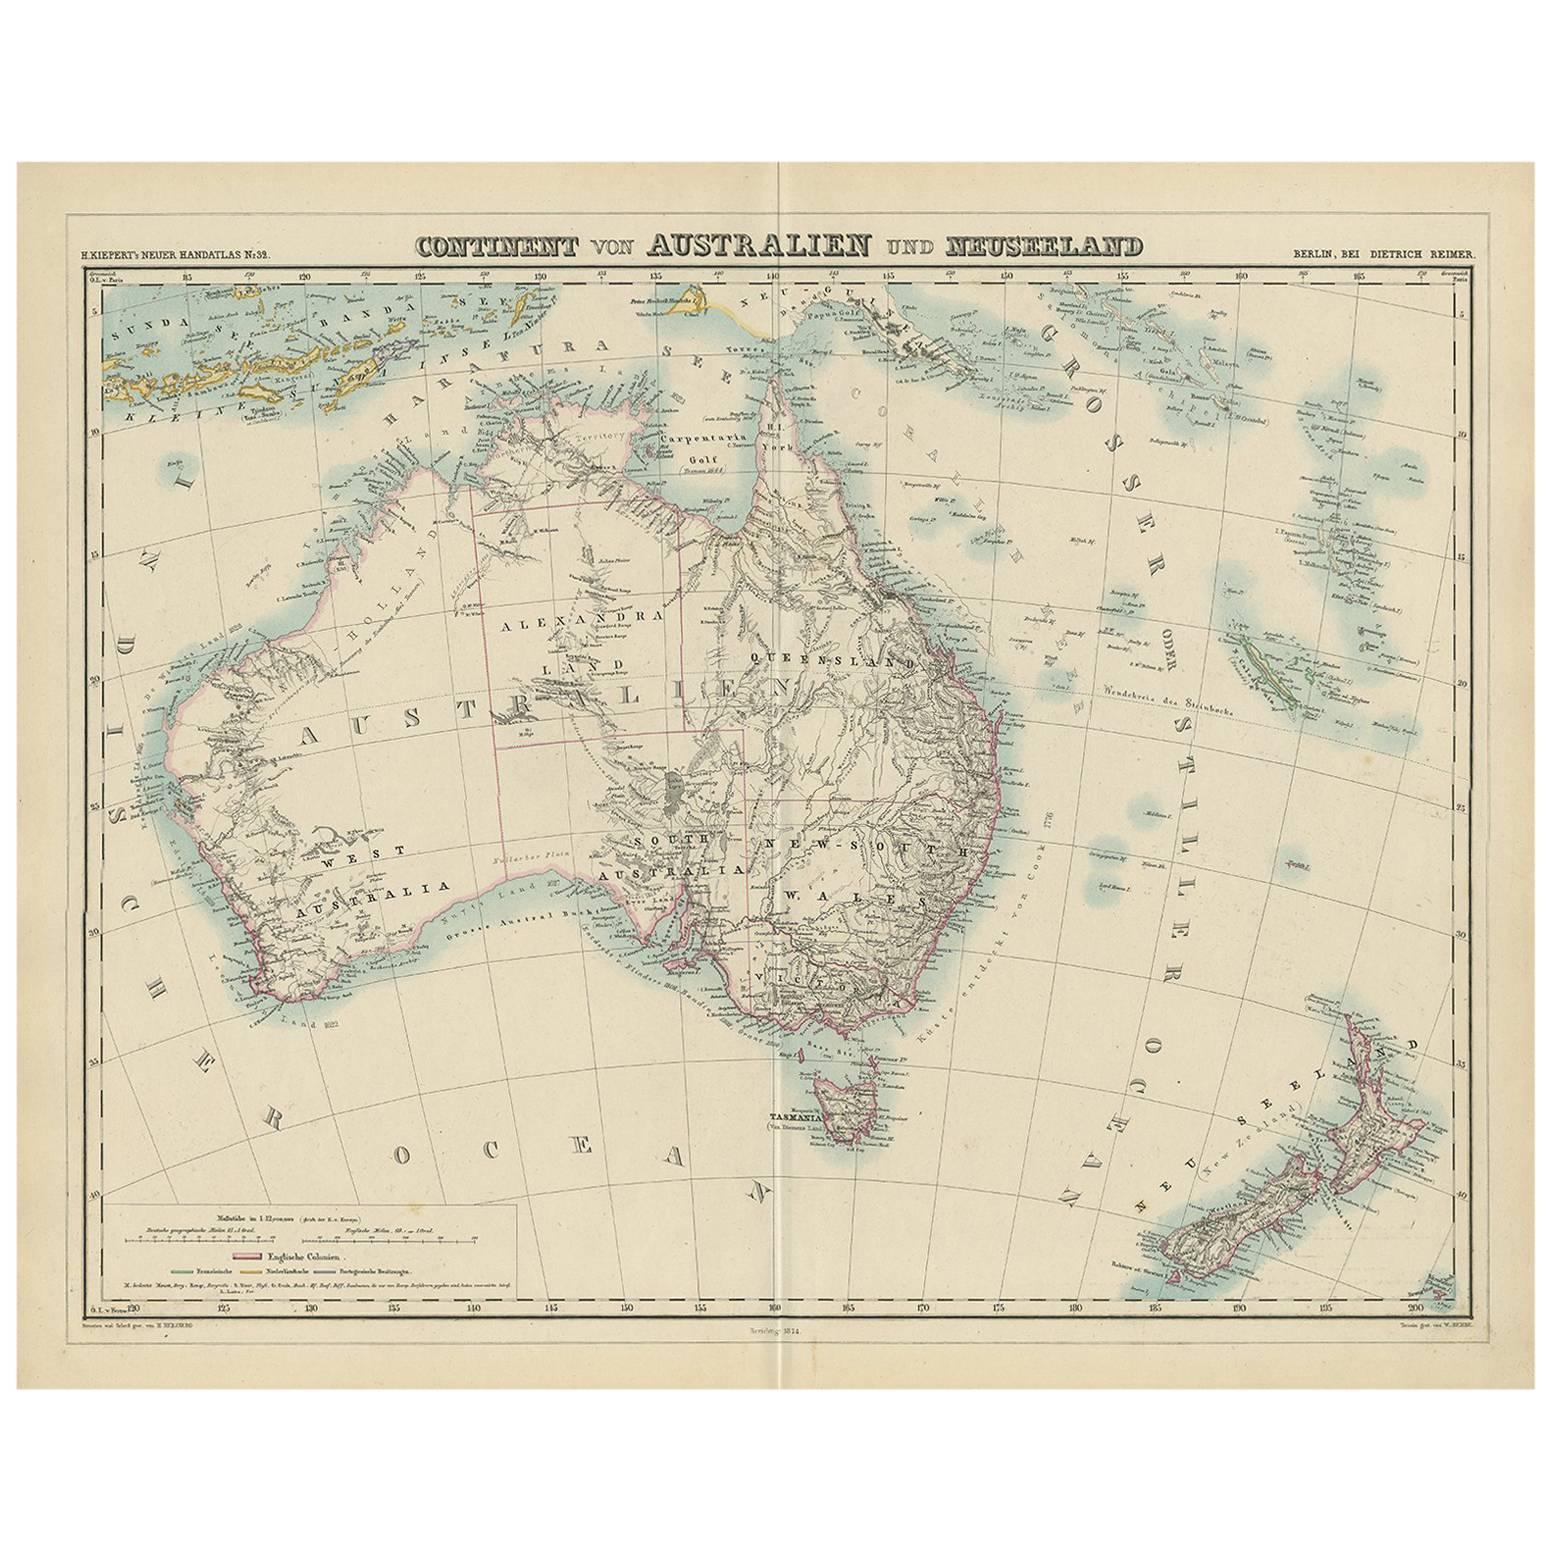 Antique Map of Australia and New Zealand by H. Kiepert, 1874